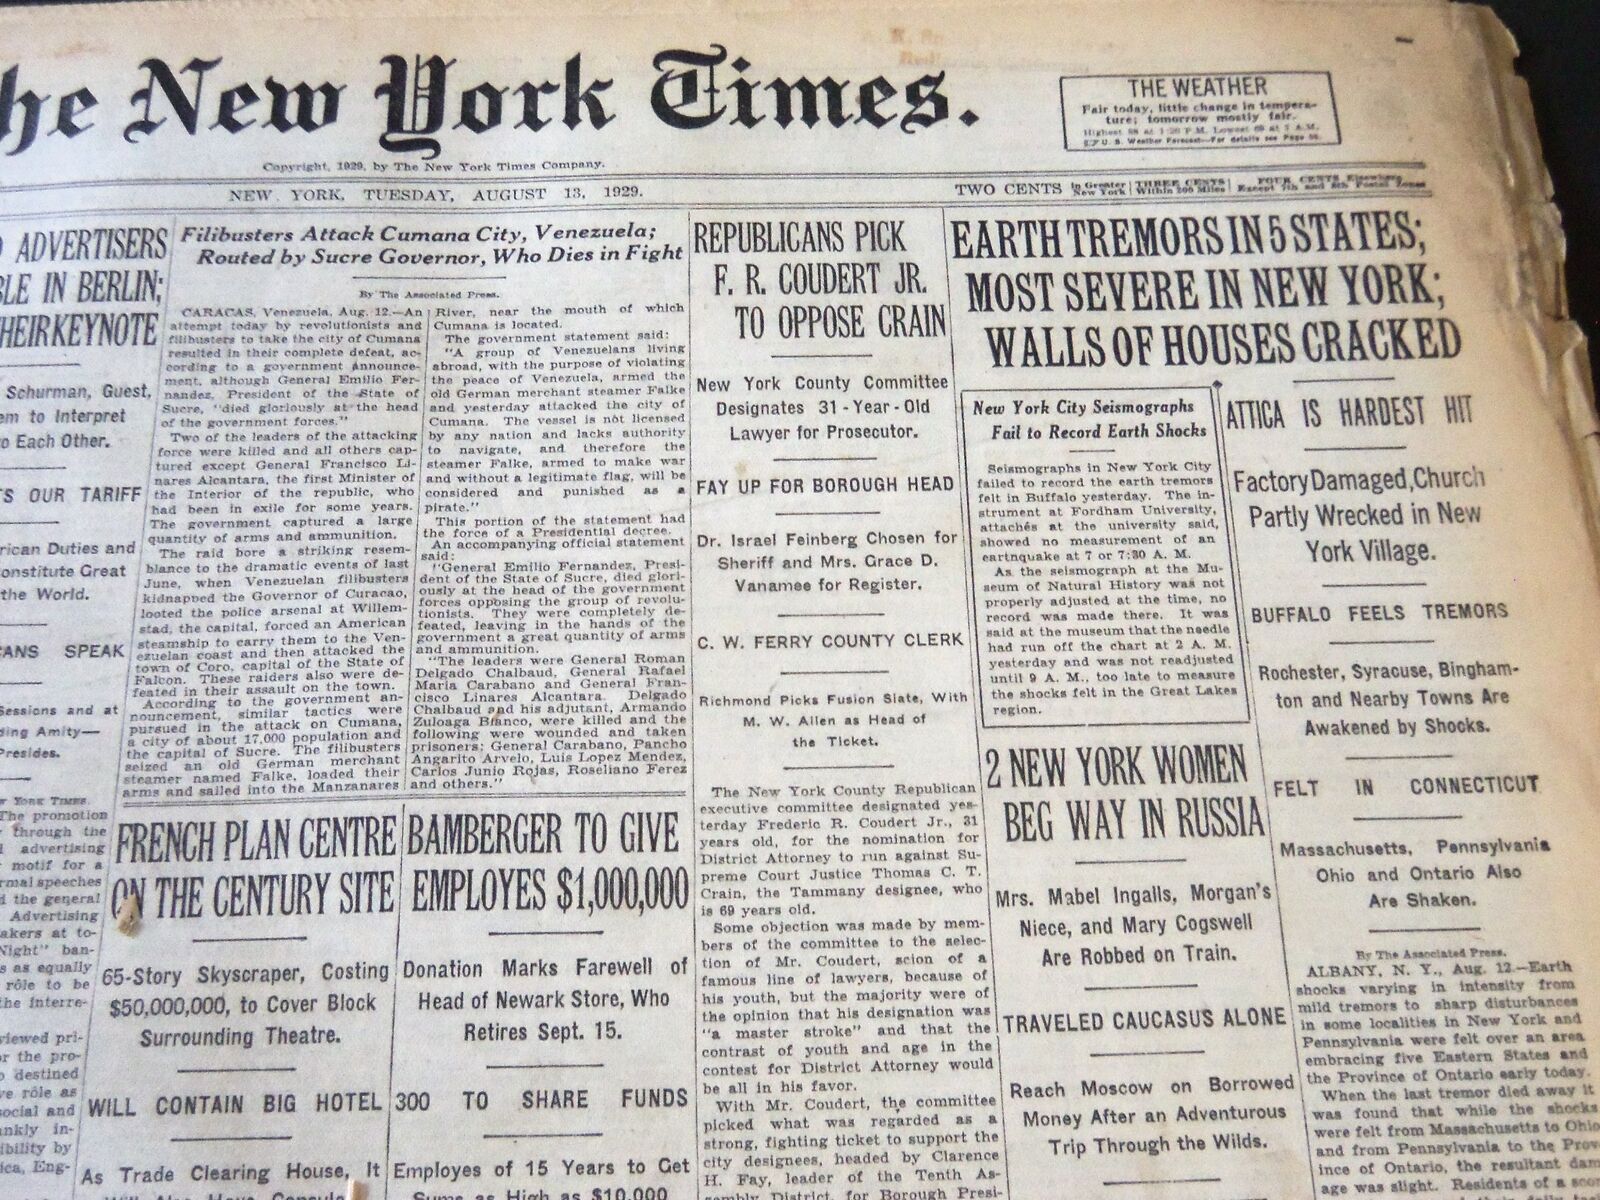 1929 AUG 13 NEW YORK TIMES - EARTH TREMORS 5 STATES MOST SEVERE IN NY - NT 6646